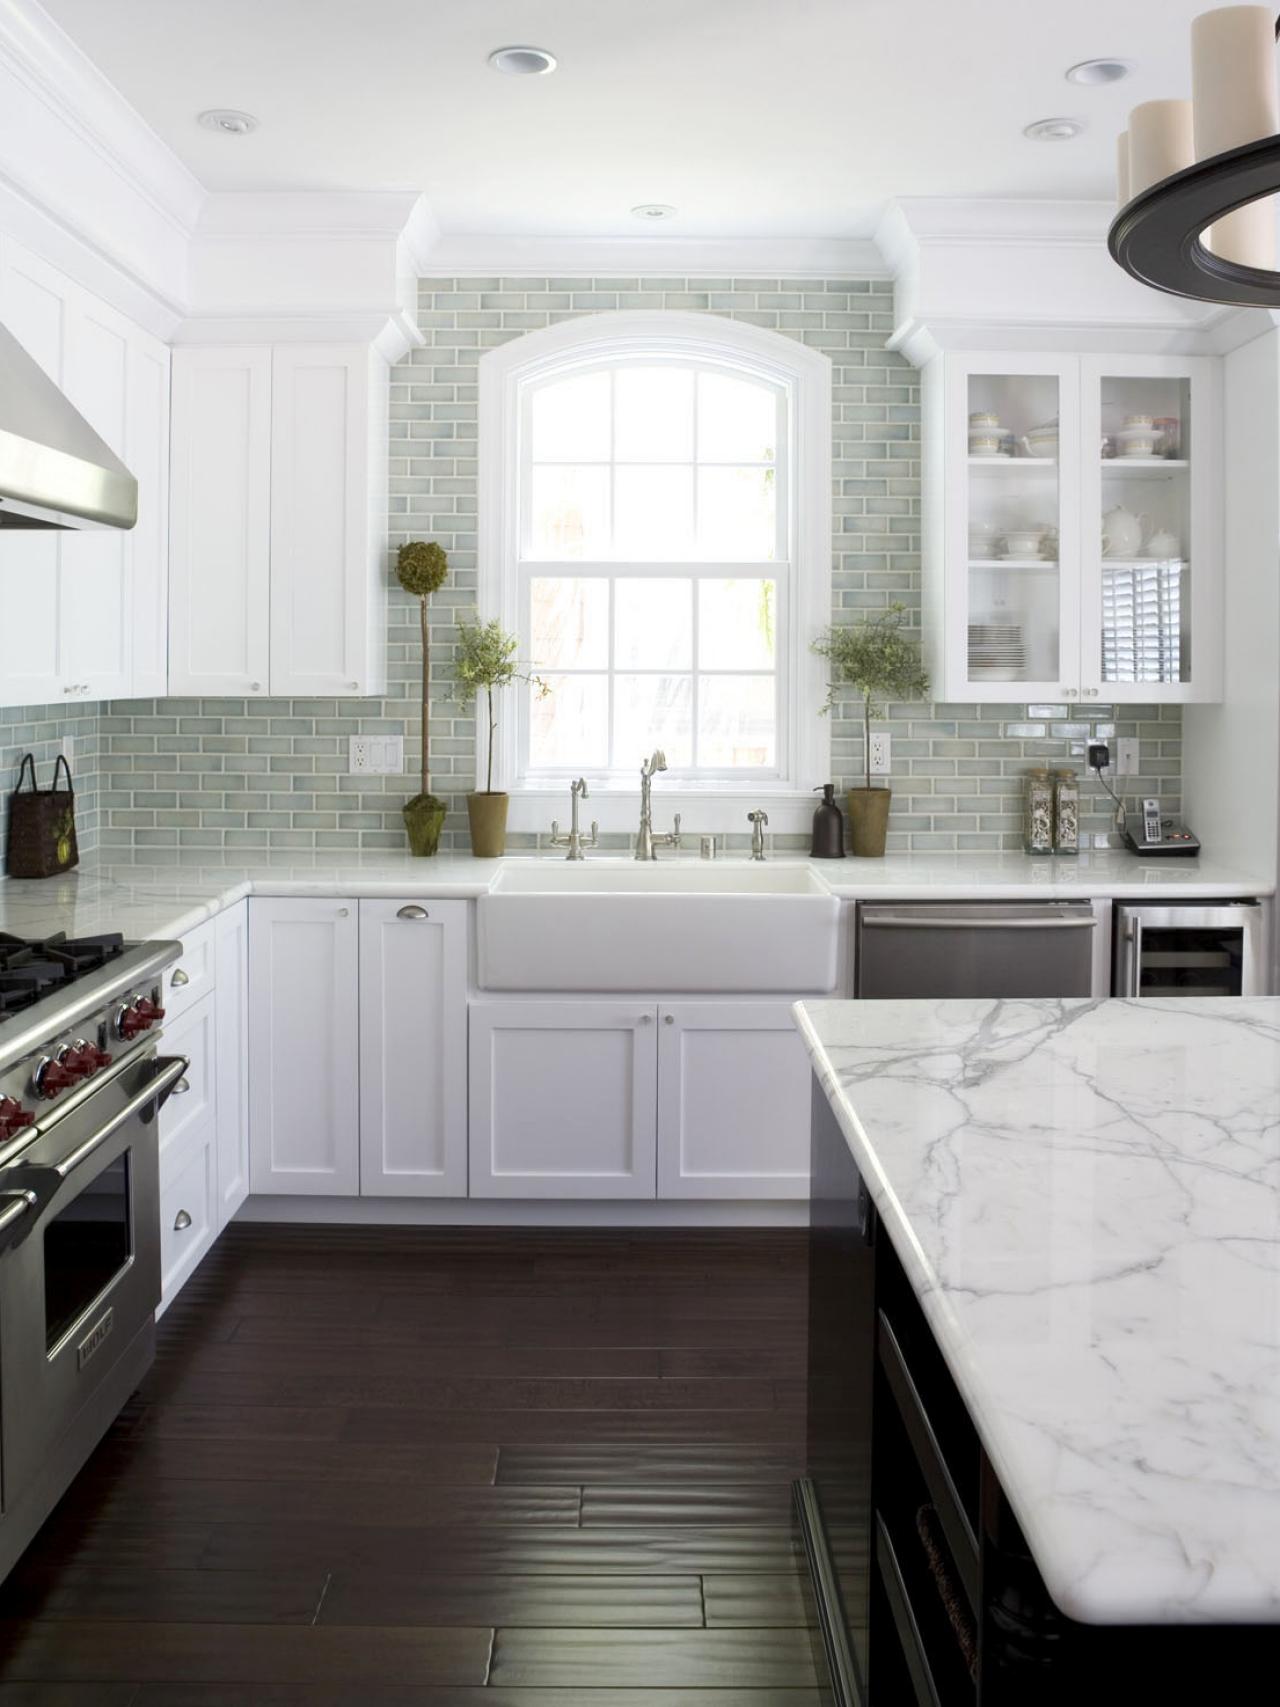  kitchen flooring ideas with white cabinets